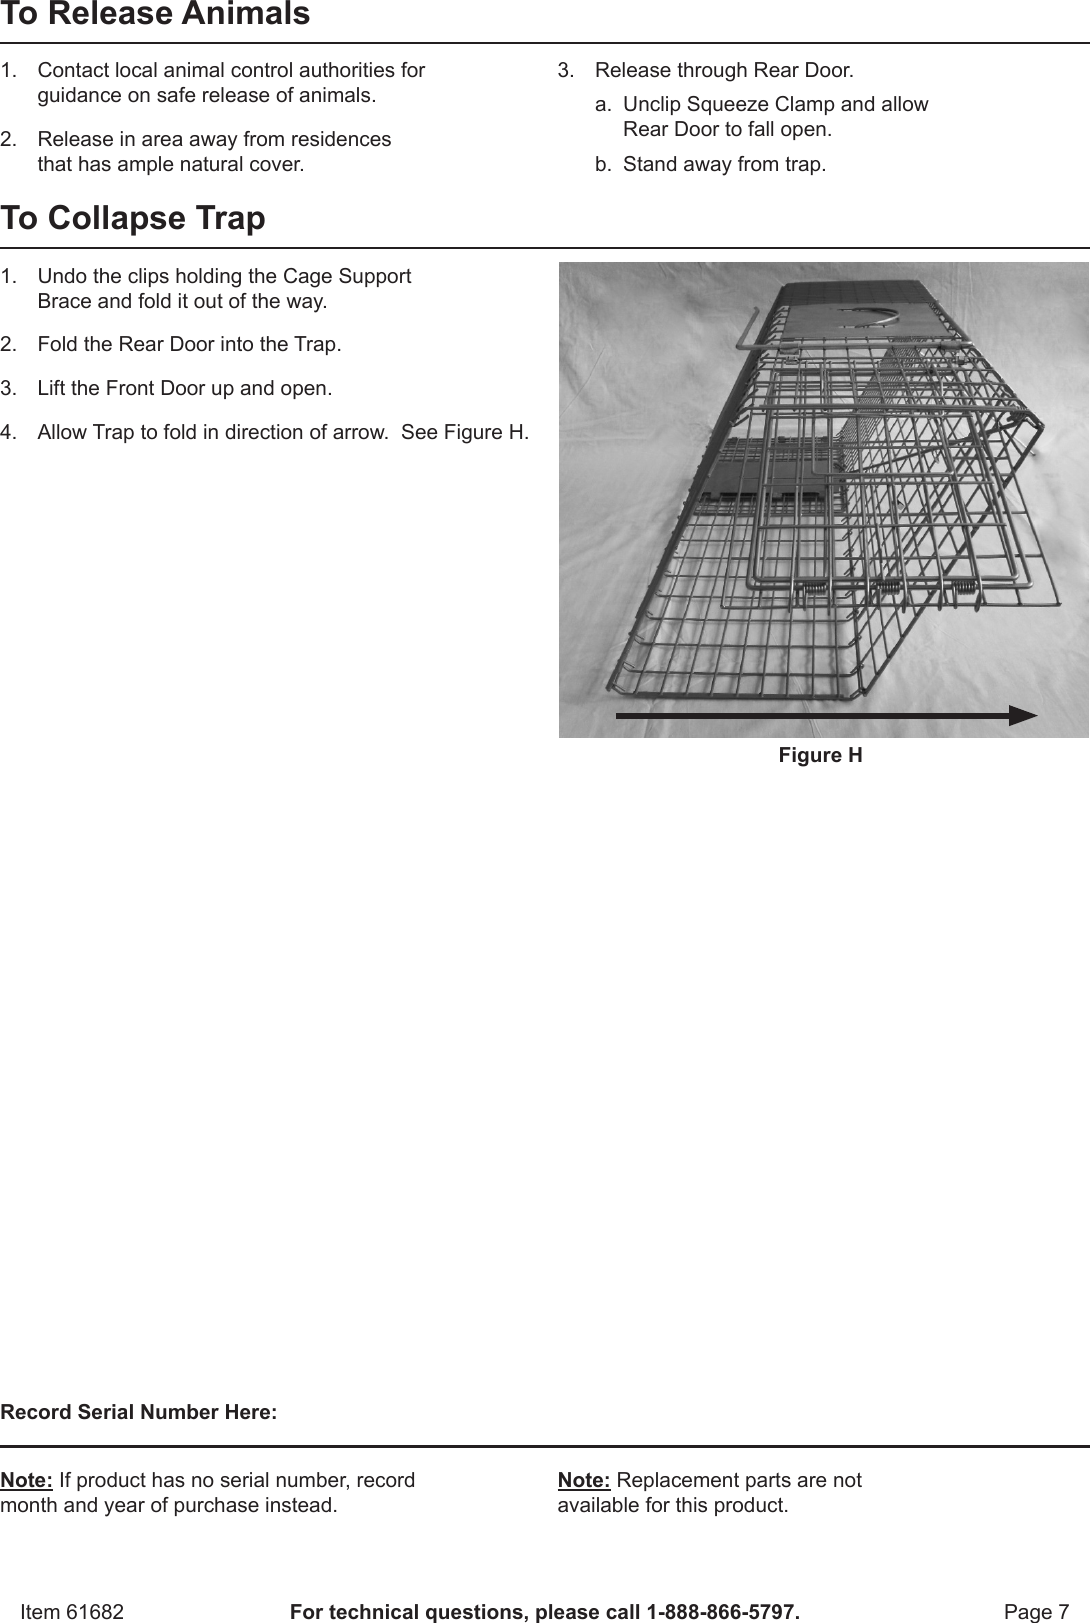 Page 7 of 8 - Harbor-Freight Harbor-Freight-32-In-X-15-In-X-10-In-Medium-Animal-Trap-Product-Manual-  Harbor-freight-32-in-x-15-in-x-10-in-medium-animal-trap-product-manual